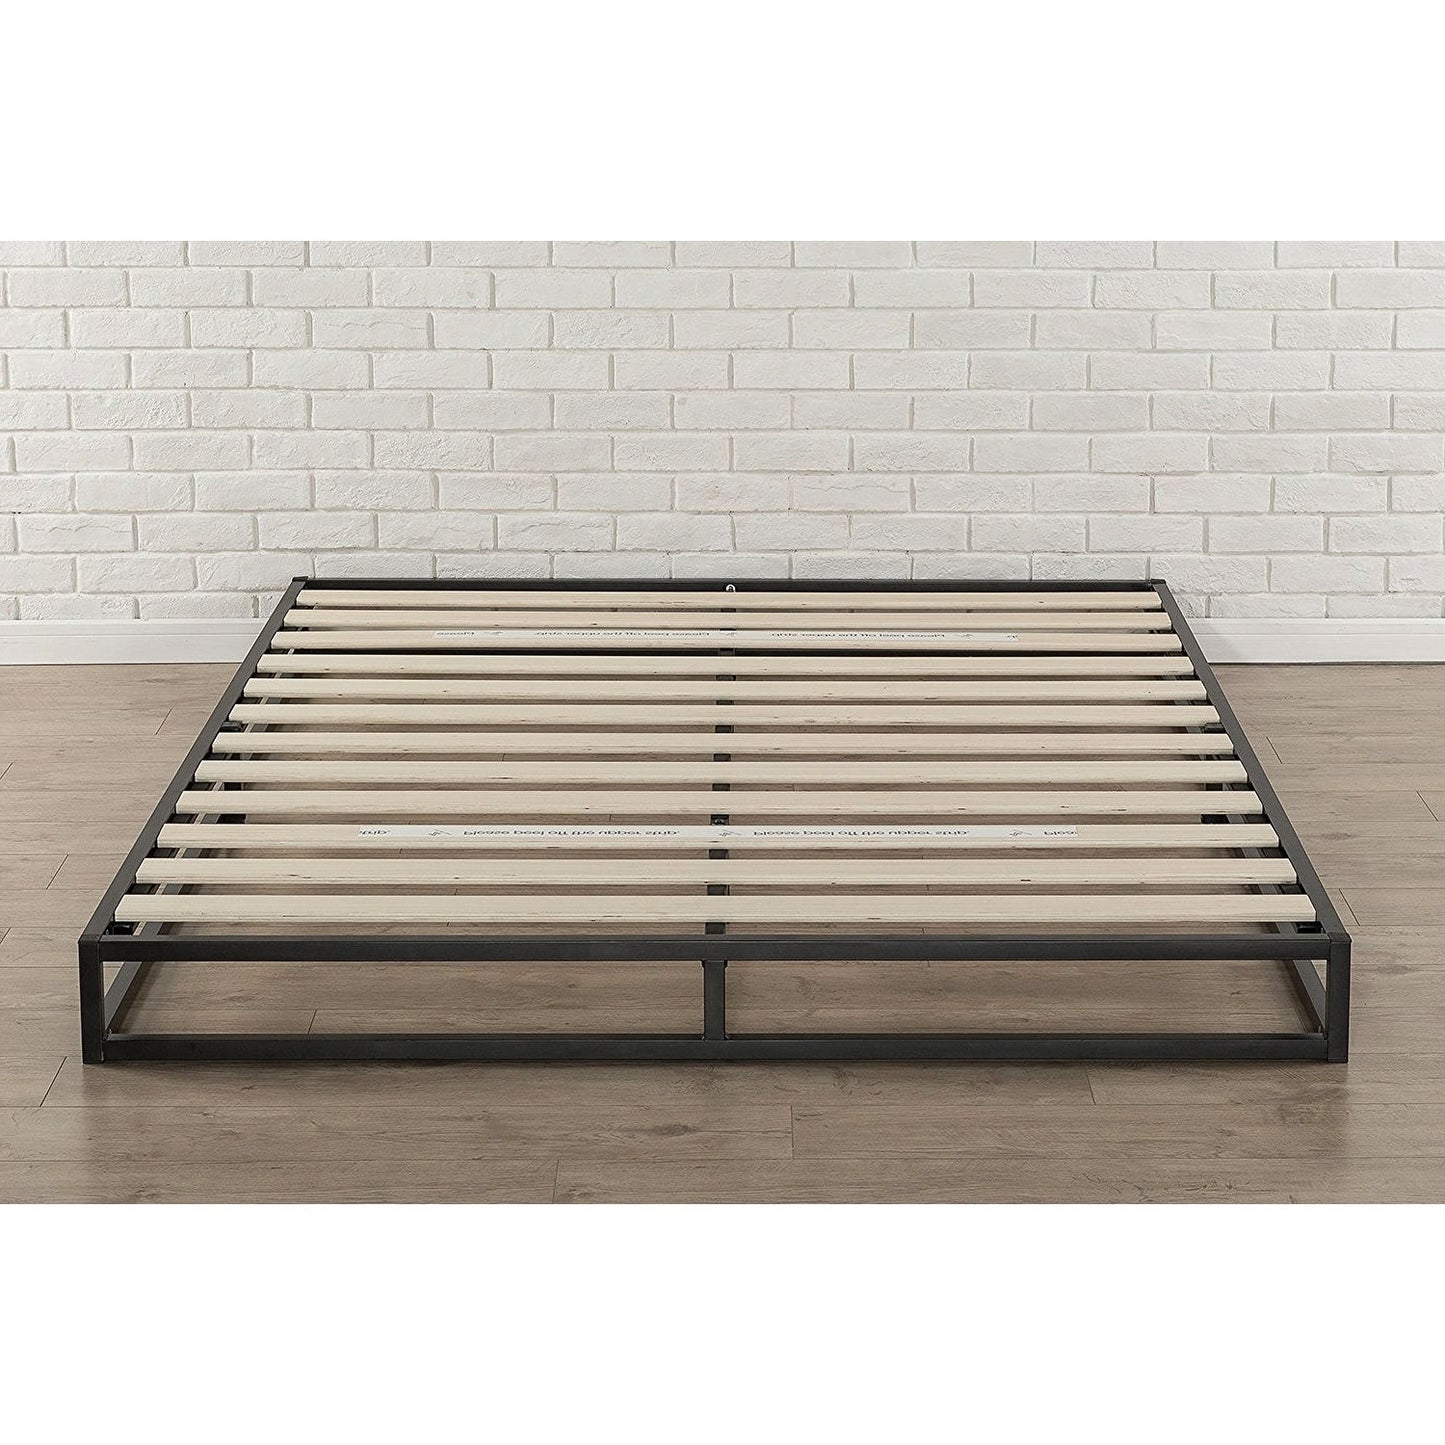 Queen size 6-inch Low Profile Metal Platform Bed Frame with Wooden Slats